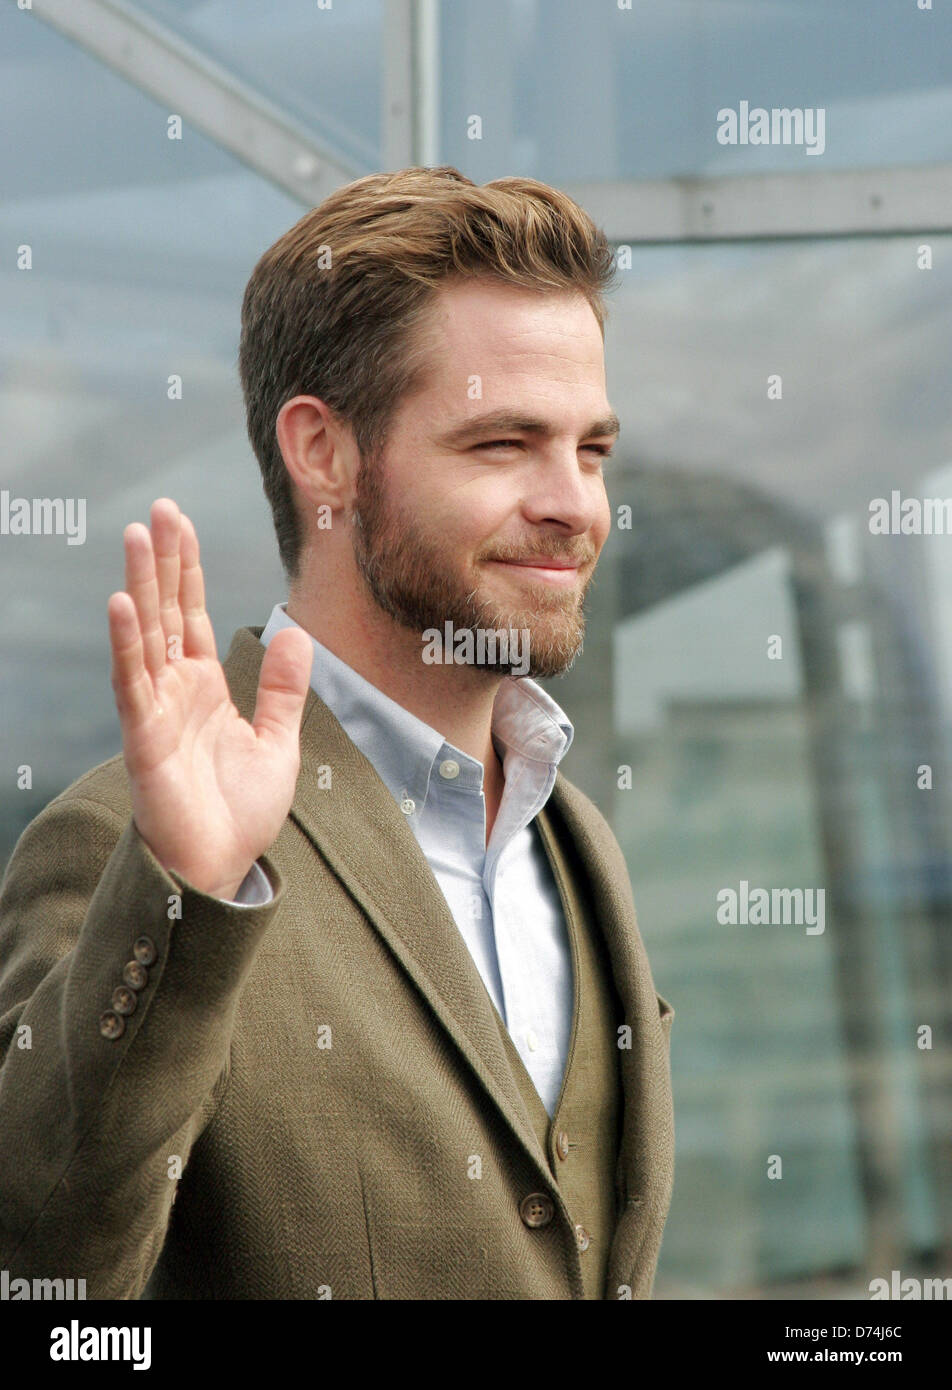 Berlin, Germany. 28th April, 2013. US actor Chris Pine poses during the presentation of the movie 'Star Trek Into Darkness' in Berlin, Germany, 28 April 2013. The film will be released in Germany on 09 May 2013. Photo: XAMAX/dpa/dpa/Alamy Live News Stock Photo